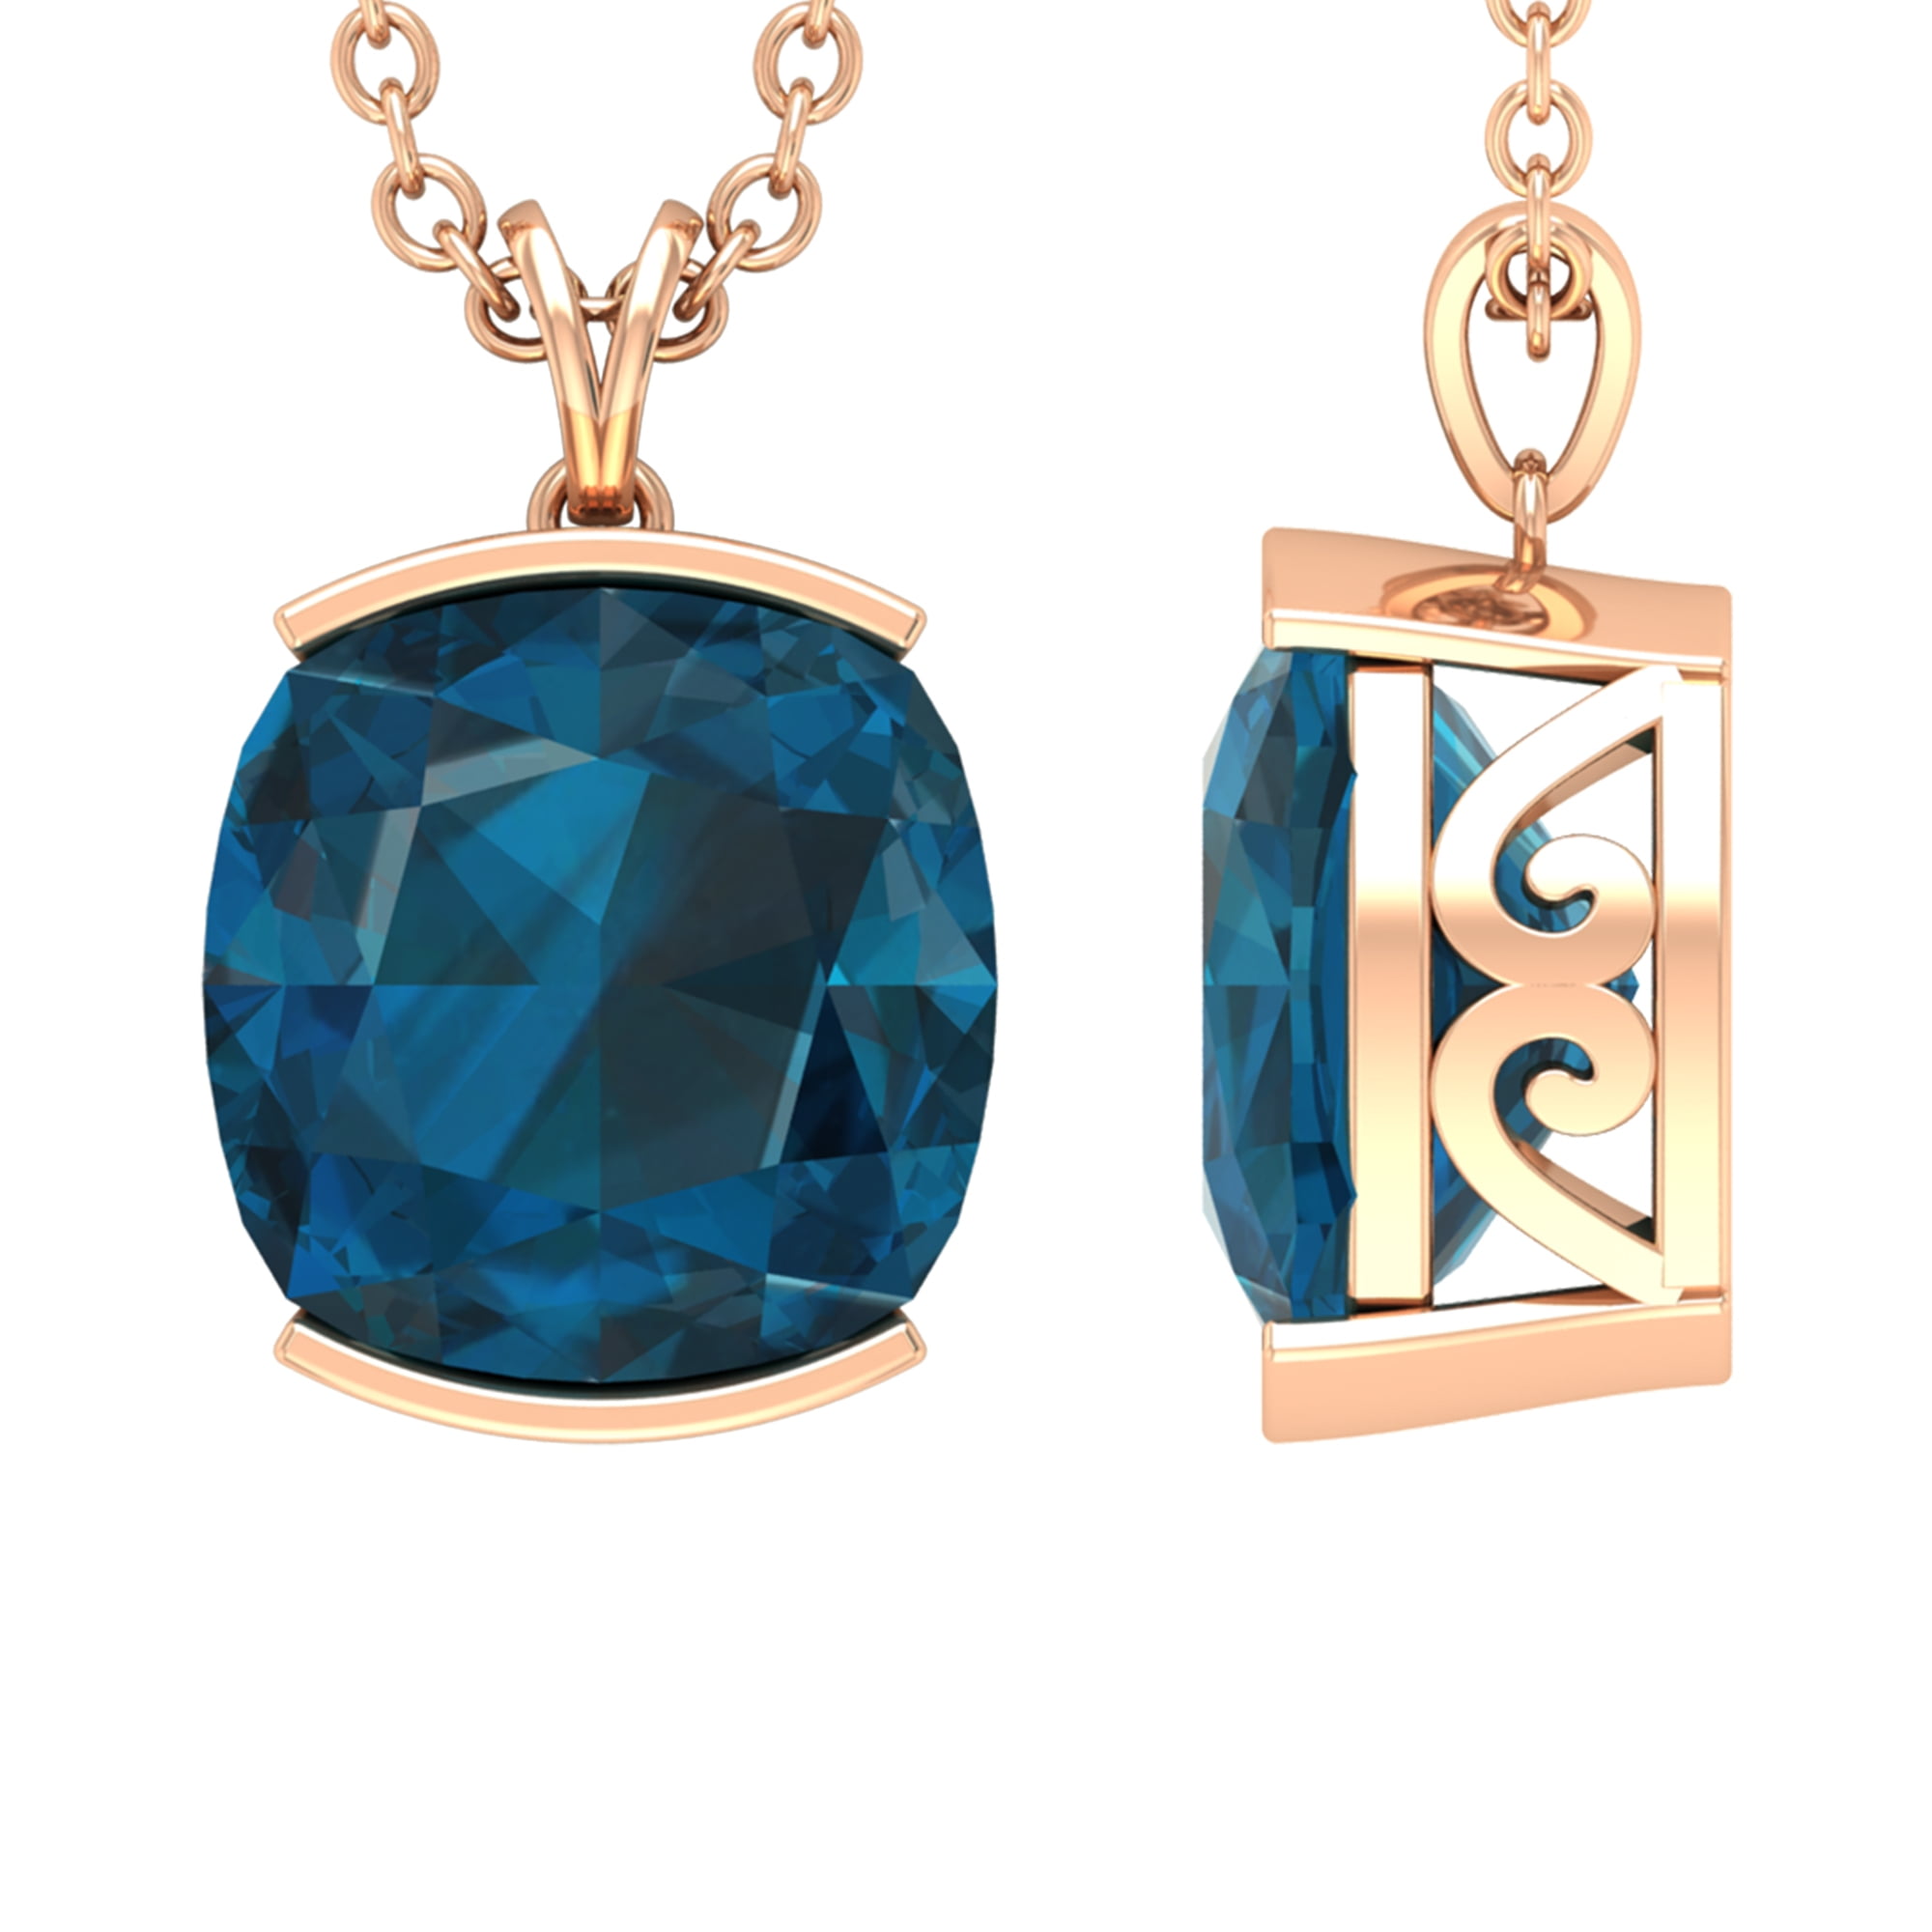 Oval Genuine Natural Blue Topaz Earrings Pendant Set With Square Rolo Chain 14K Rose Gold 6 x 8 mm